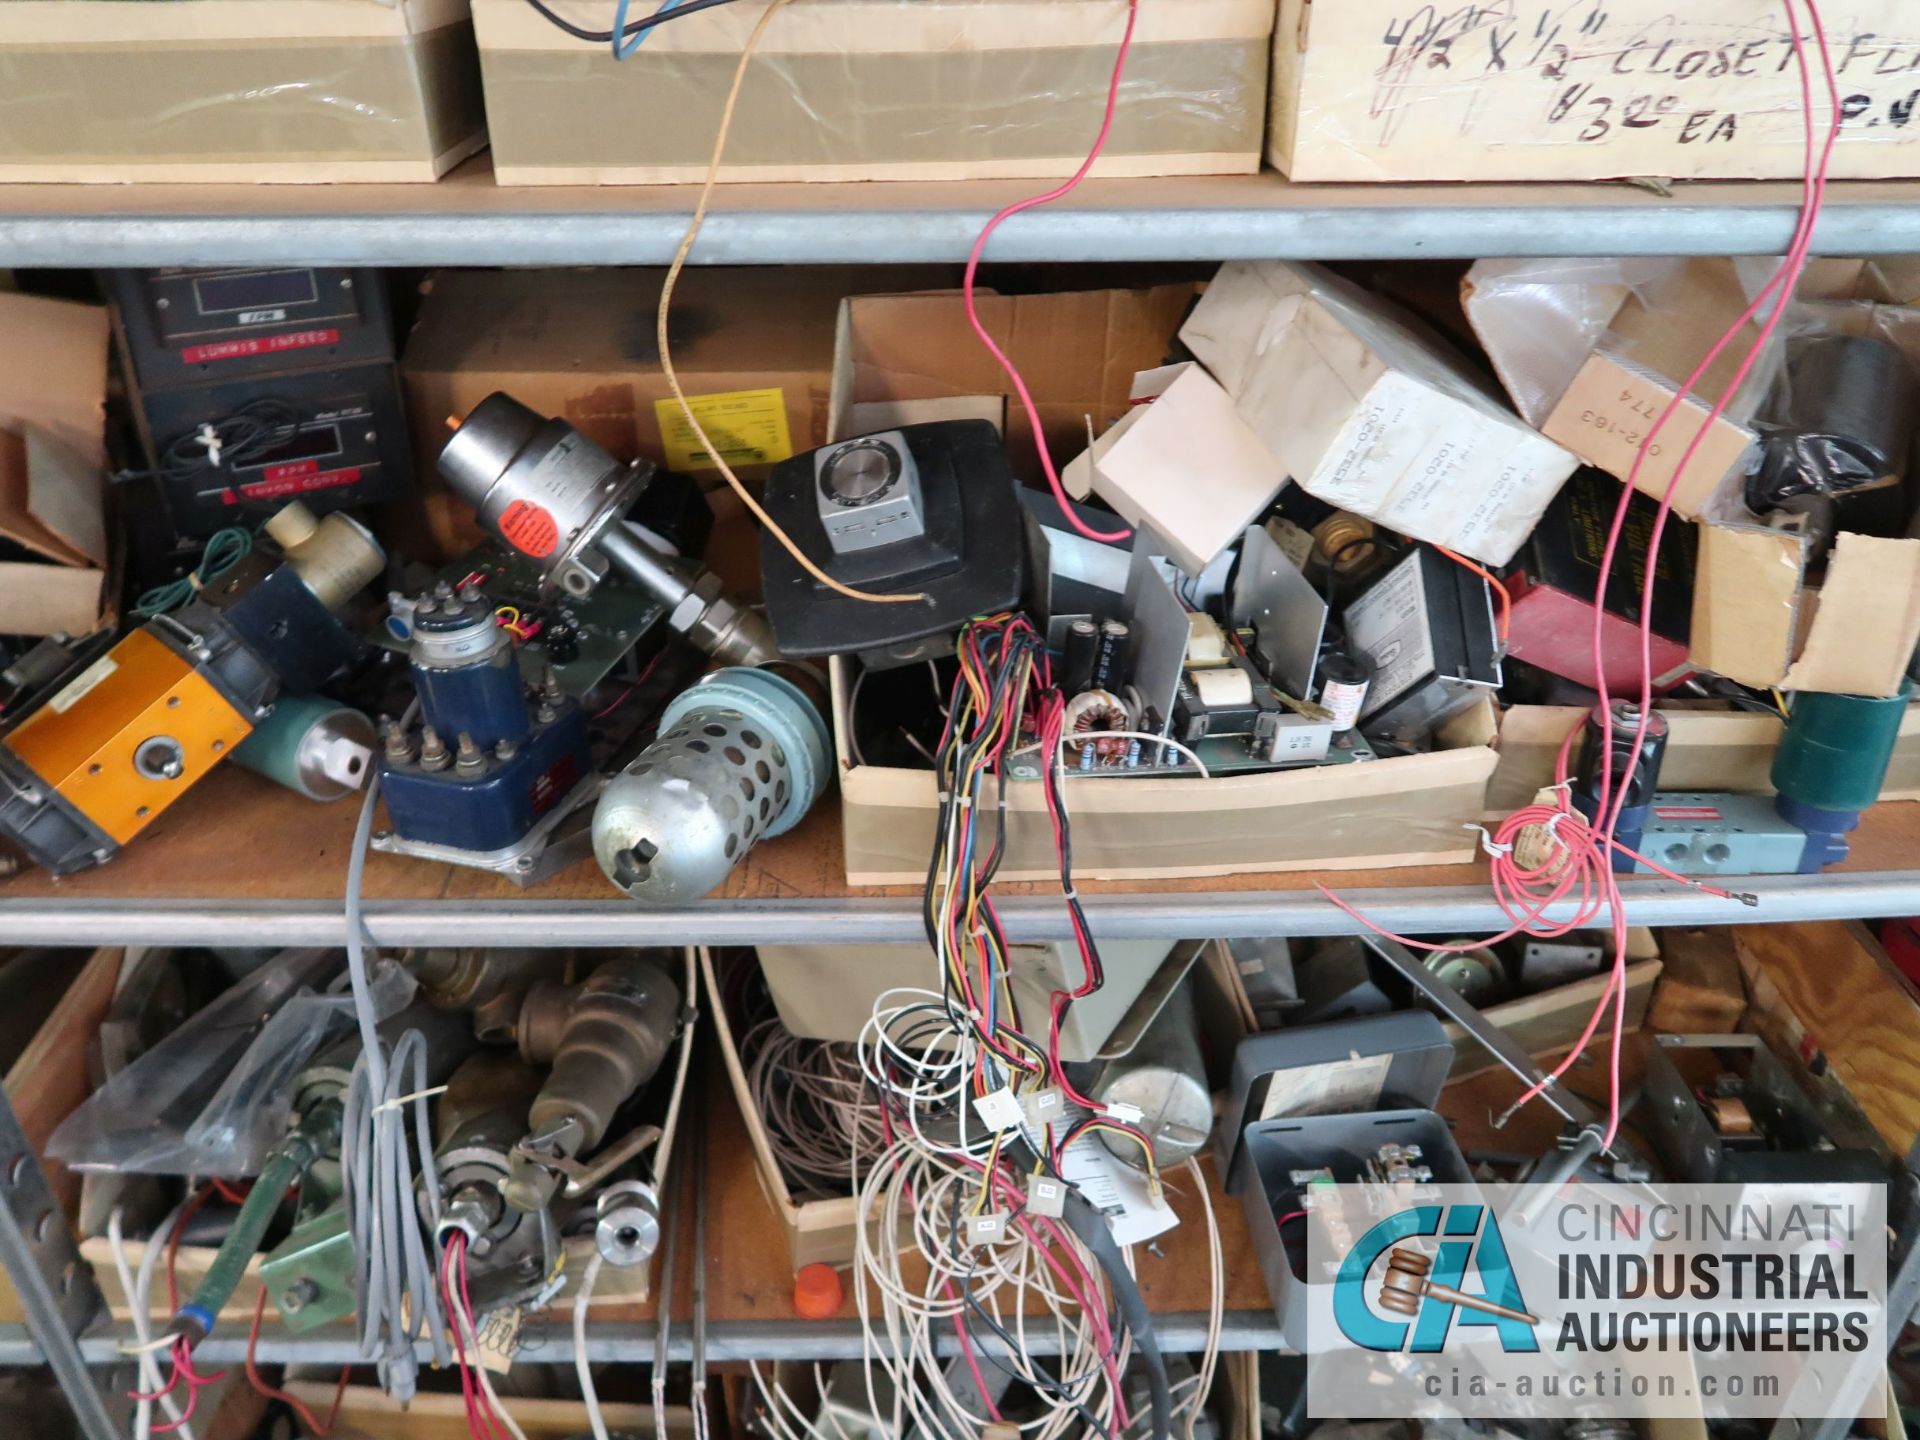 CONTENTS OF (16) SHELVES INCLUDING MISCELLANEOUS VALVES, THERMOSTATS, ANALYZERS, ELECTRICAL, CONTROL - Image 29 of 47